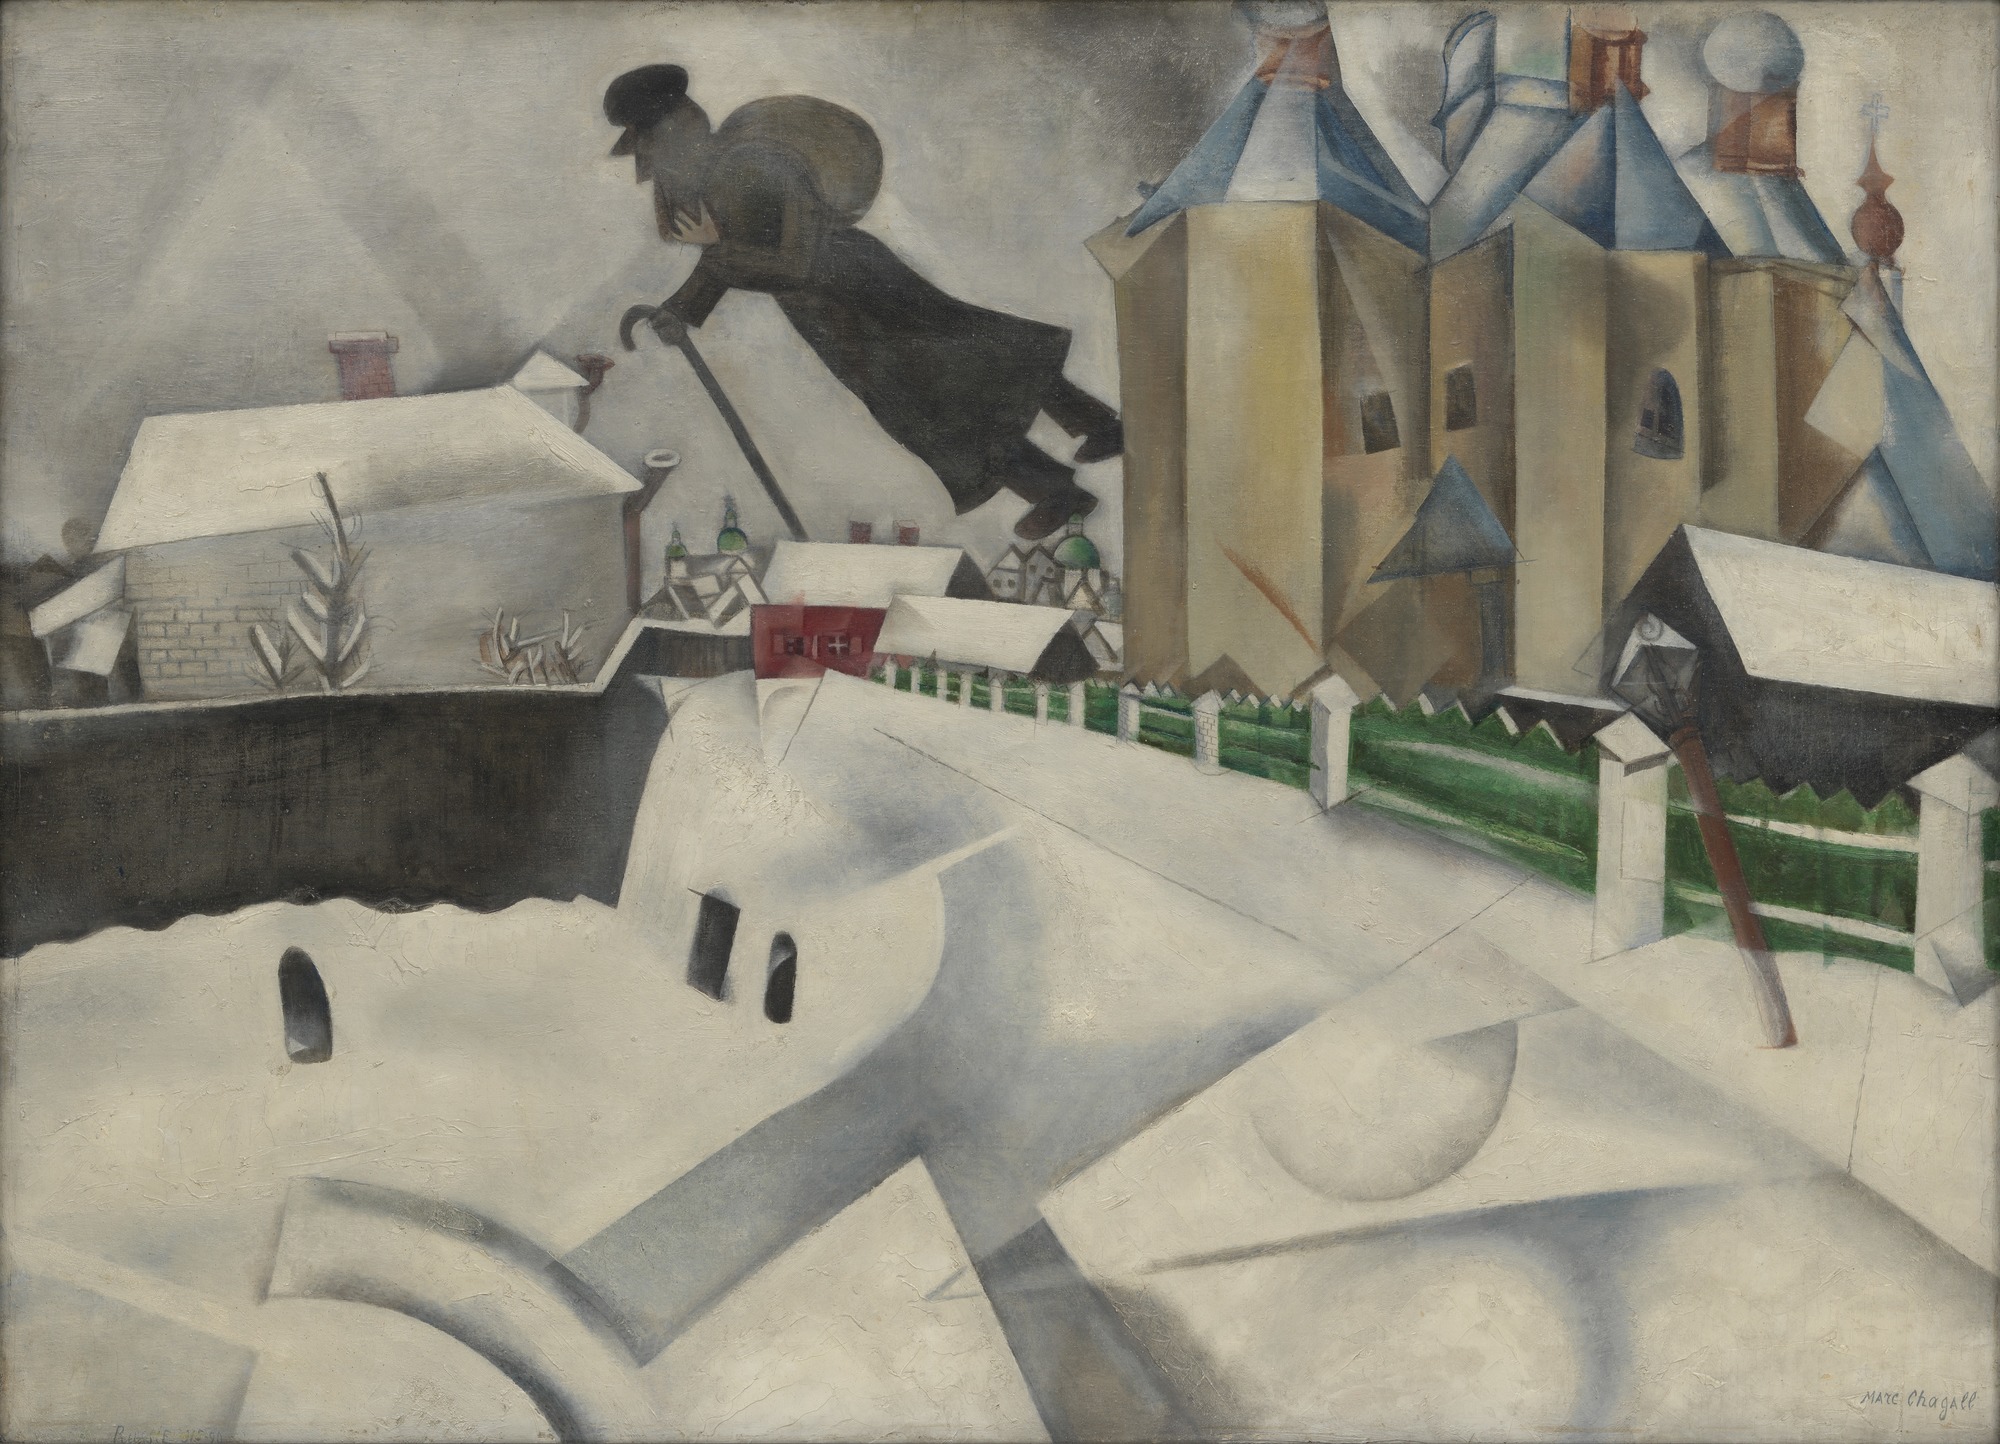 Marc Chagall, Over Vitebsk, 1915-20, oil on canvas, 26 3/8 x 36 ½ inches (MoMA)